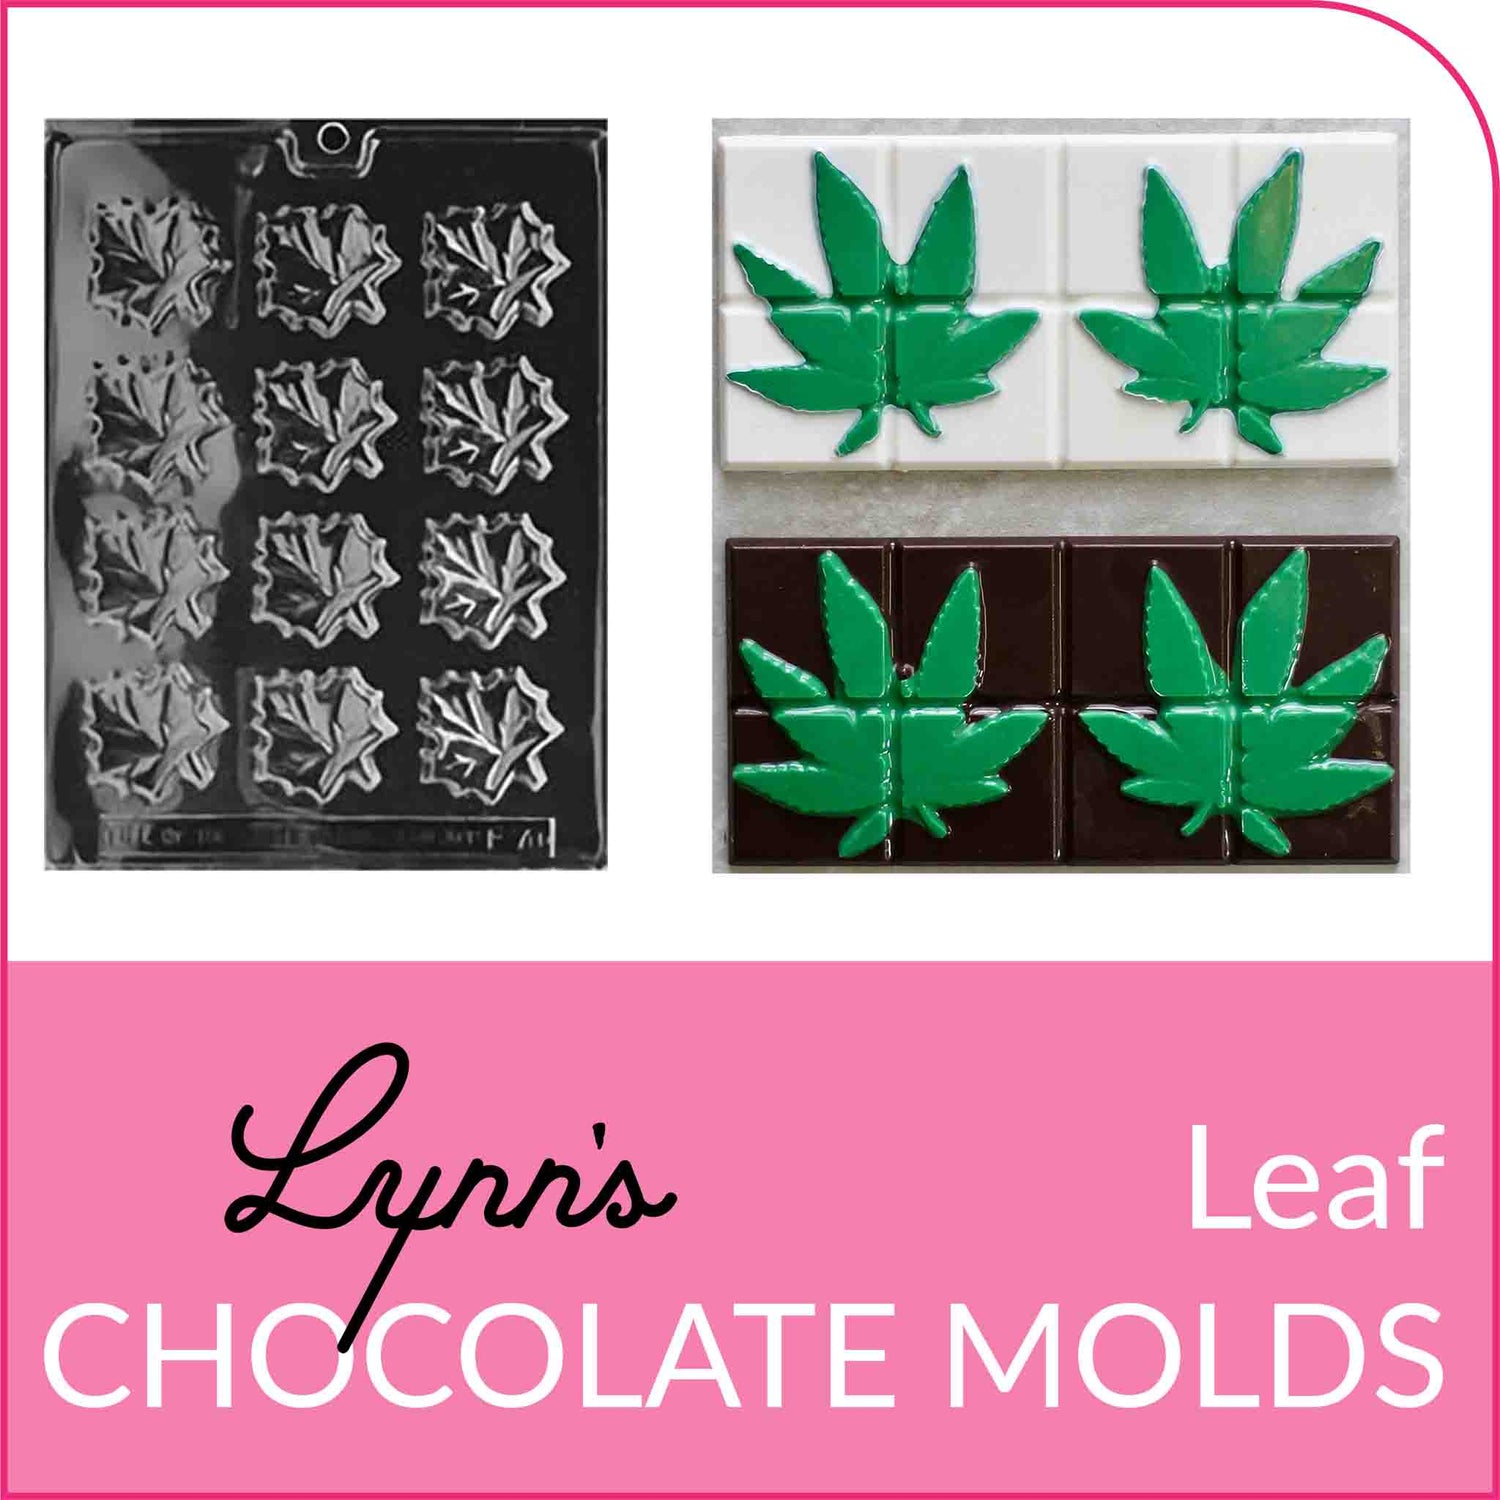 Shop leaf themed chocolate molds from Lynn's Cake, Candy, & Chocolate Supplies.